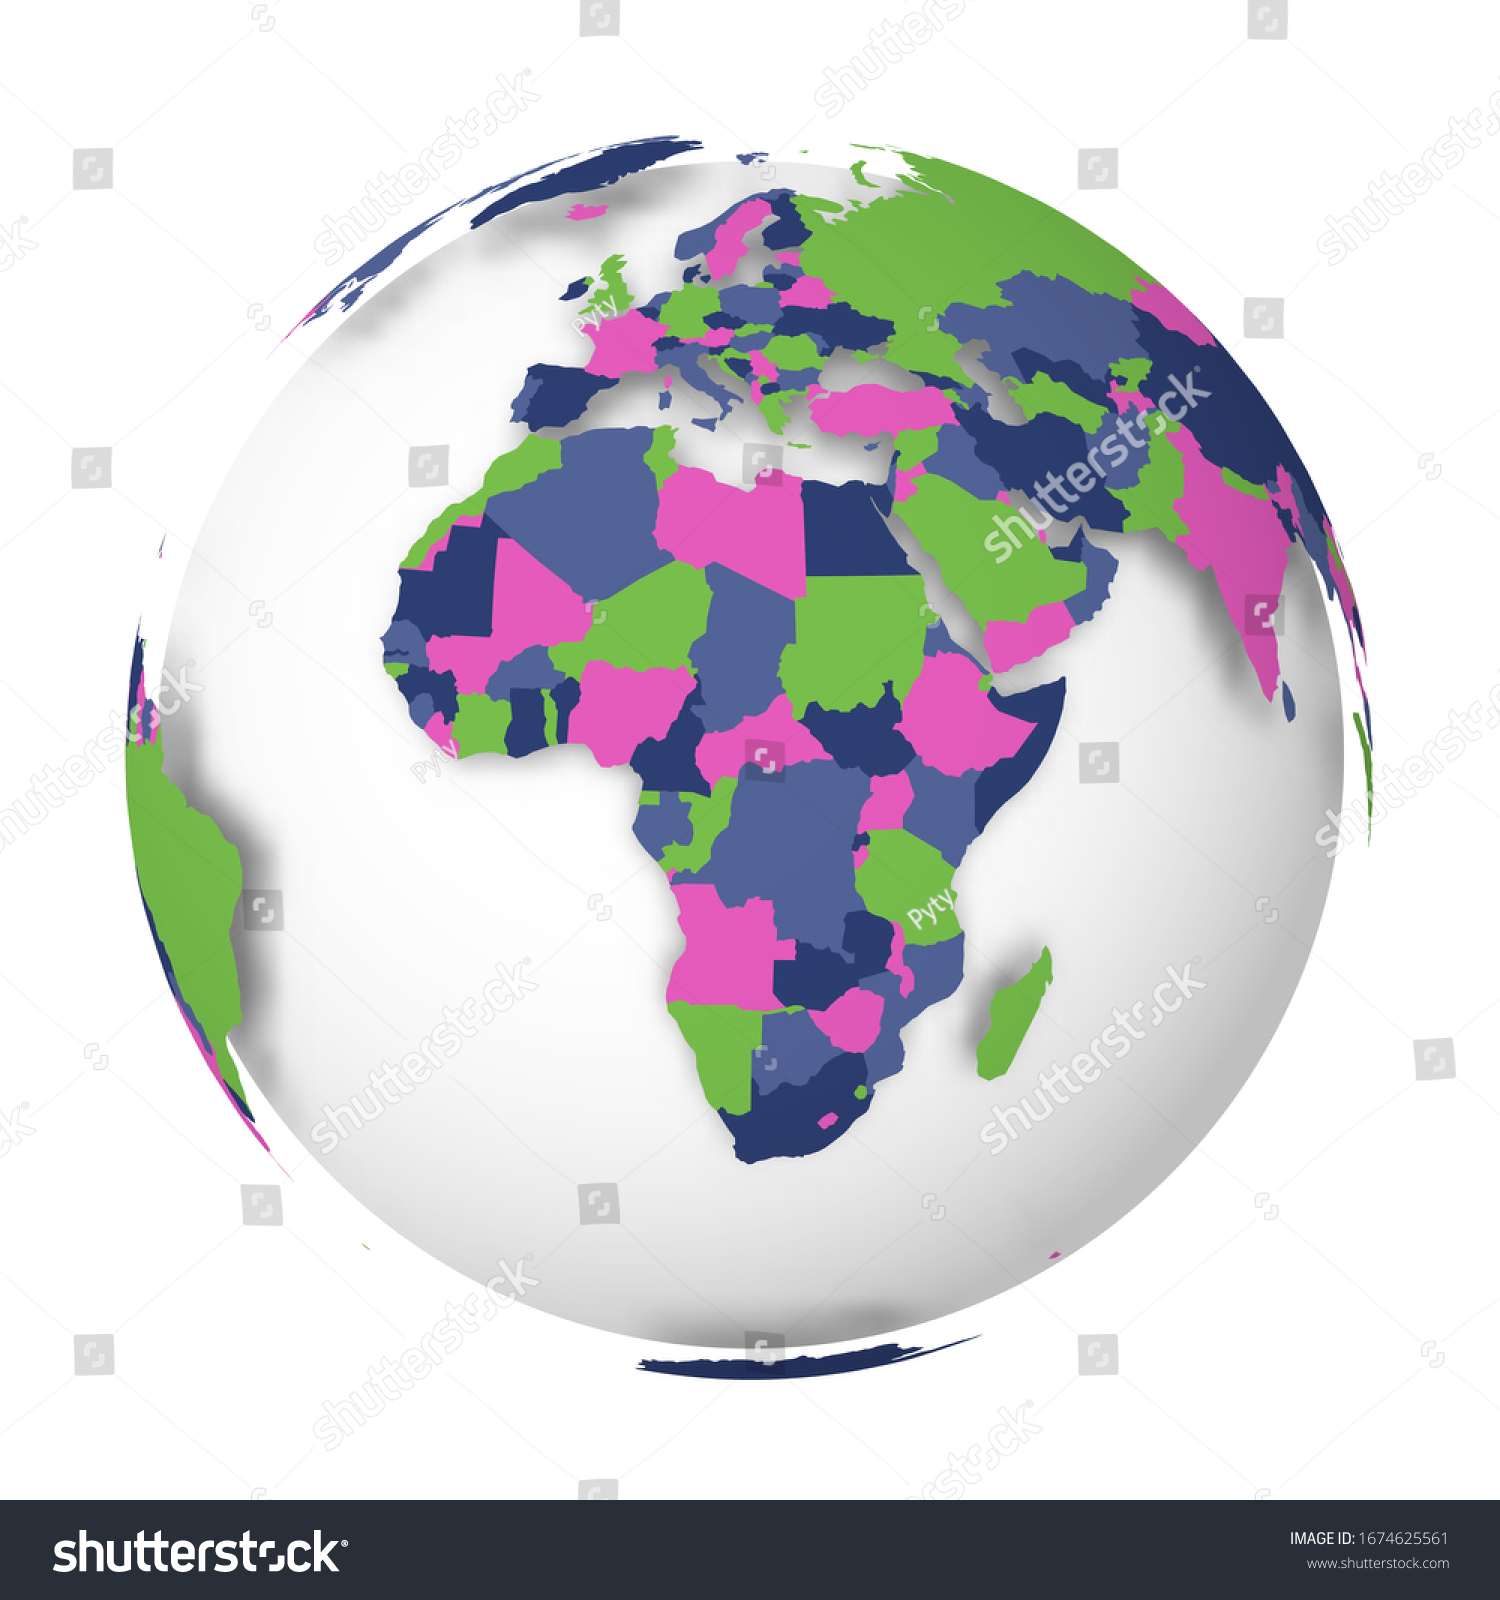 Blank Political Map Of Africa 3d Earth Globe Royalty Free Stock Vector 1674625561 0045